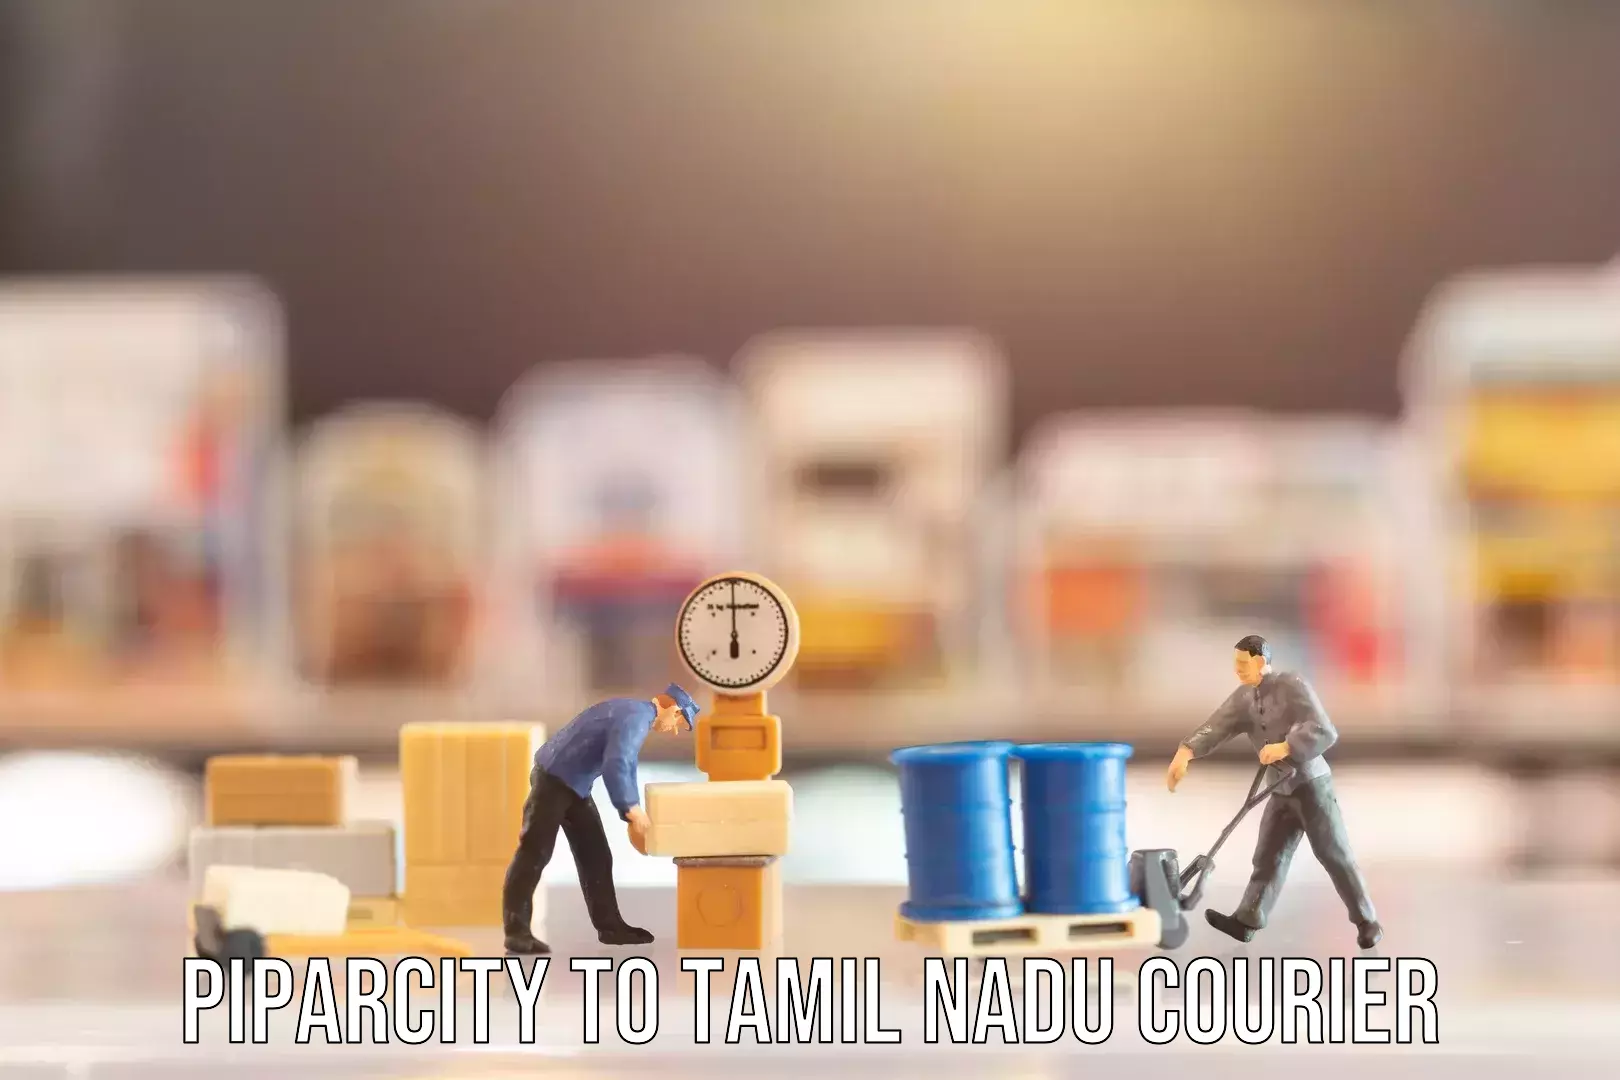 Luggage delivery network Piparcity to Tamil Nadu